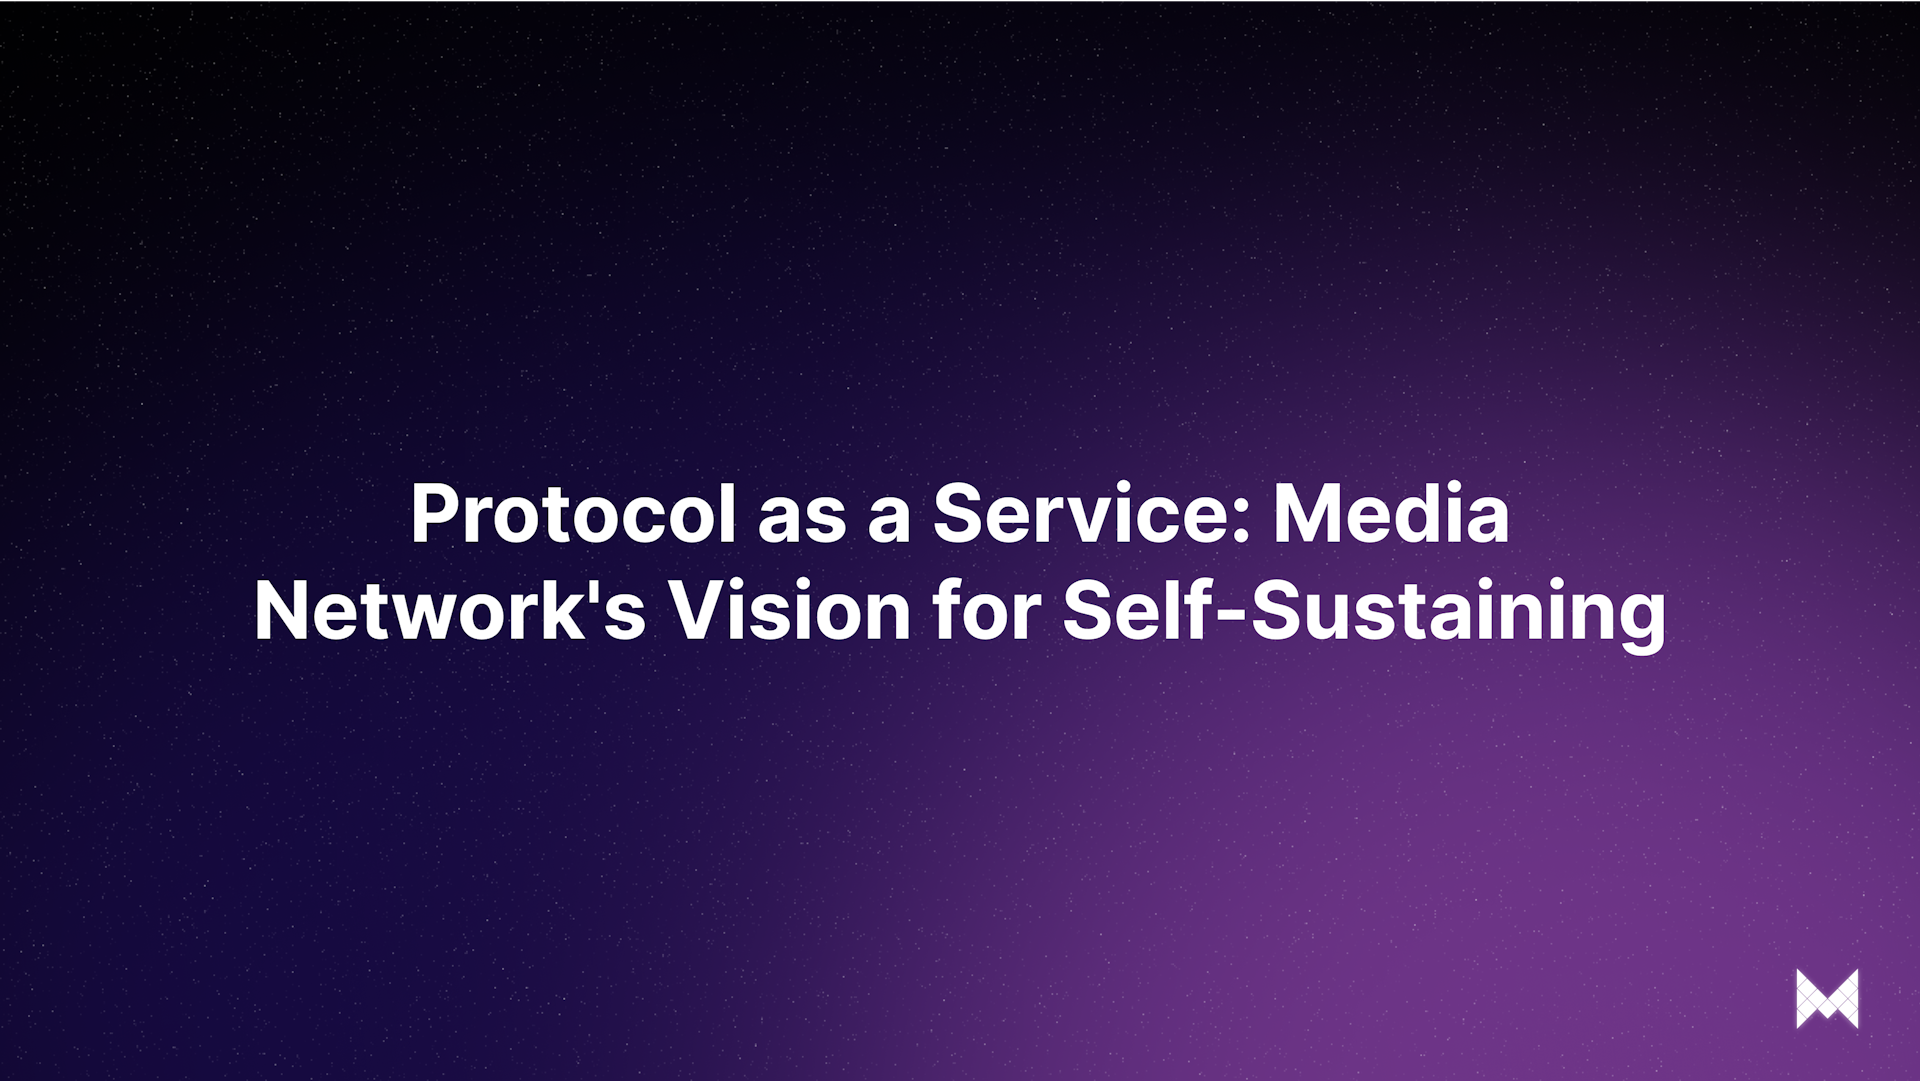 Protocol as a Service: Media Network's Vision for Self-Sustaining